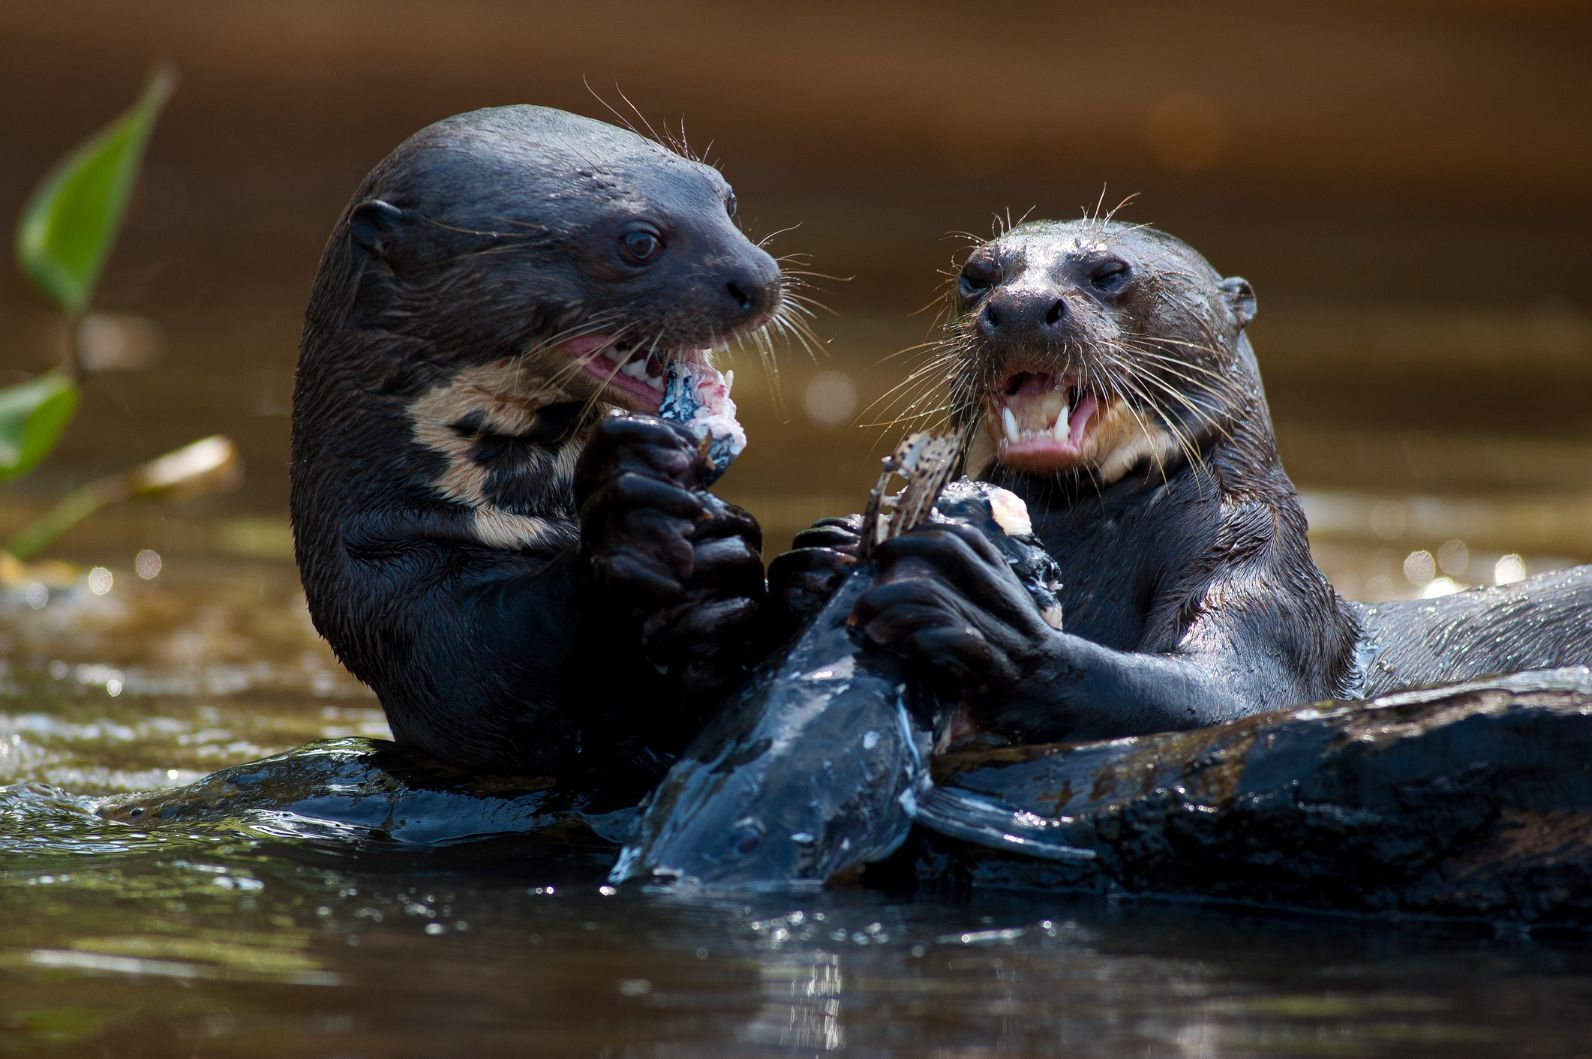 Two giant otters eating a fish together.